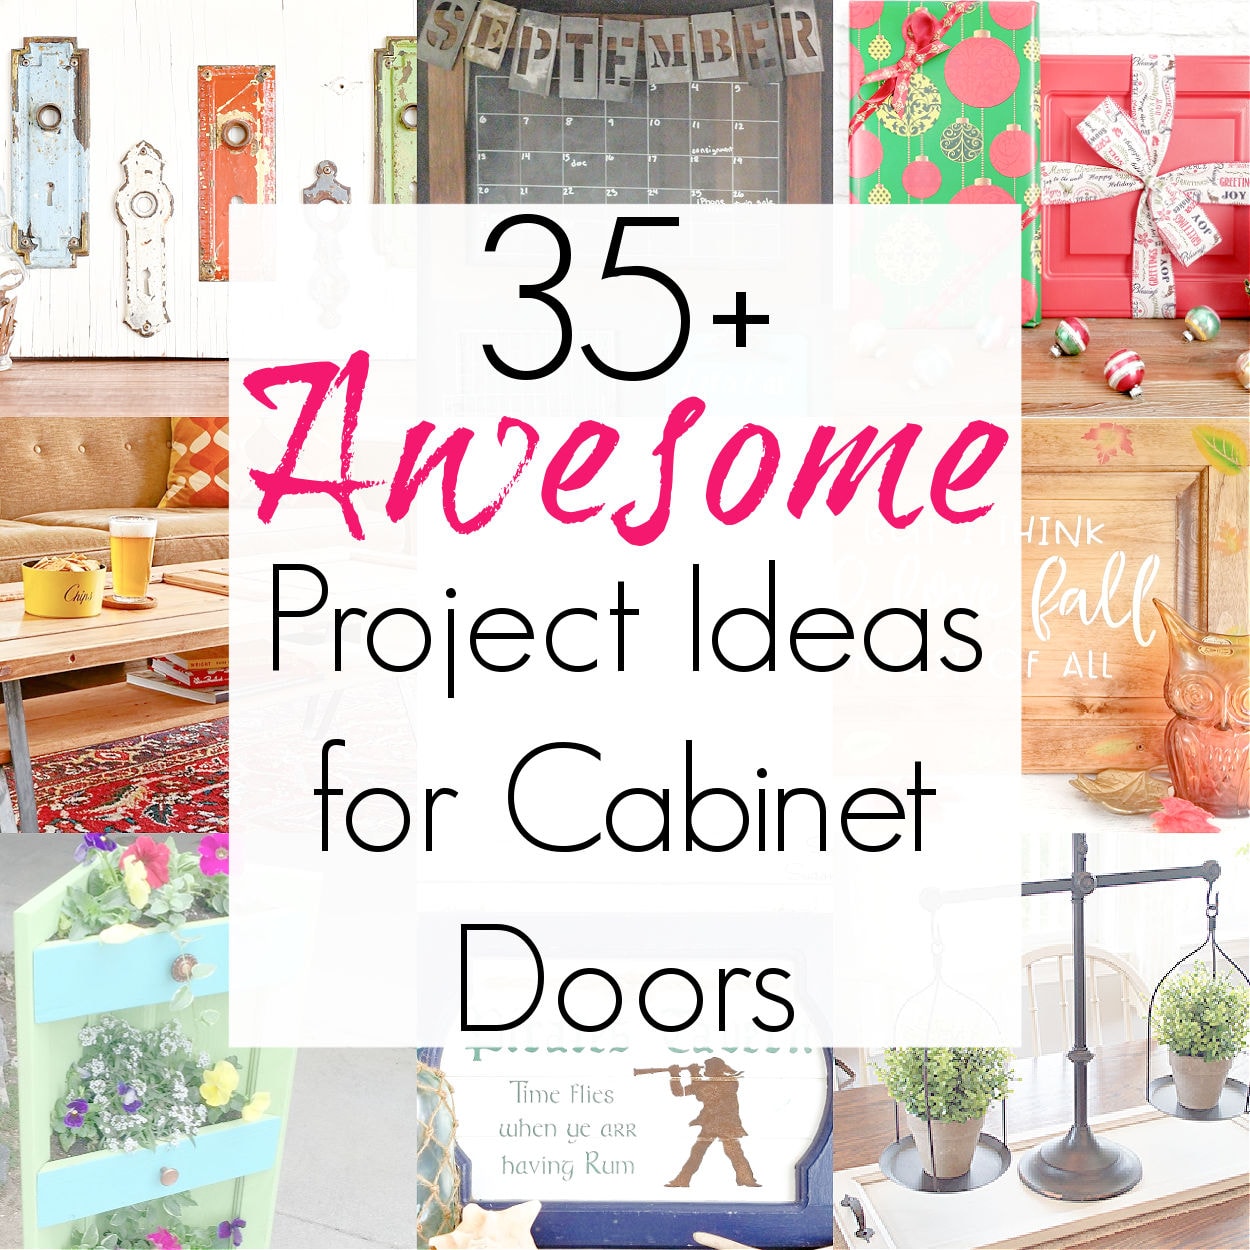 Upcycling Ideas Projects that Repurpose Cabinet Doors